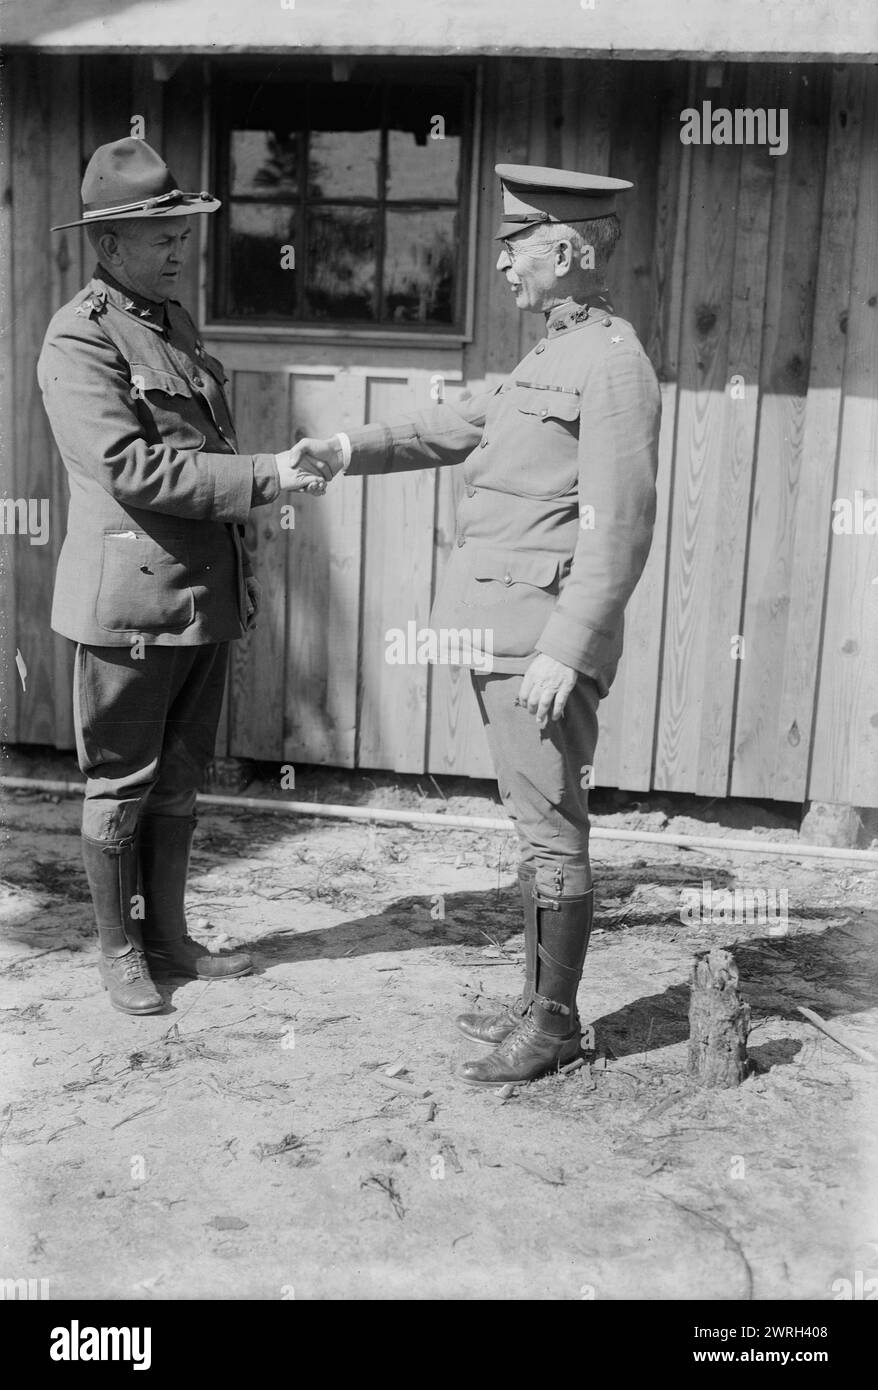 Gen. Bell &amp; Gen. Crowder, between 1917 and 1918. Franklin Bell (1856-1919), a U.S. Army officer and Enoch H. Crowder (1859-1932, a U.S. Army lawyer at Camp Upton, a U.S. Army installation located on Long Island, in Yaphank, New York, during World War I. Stock Photo